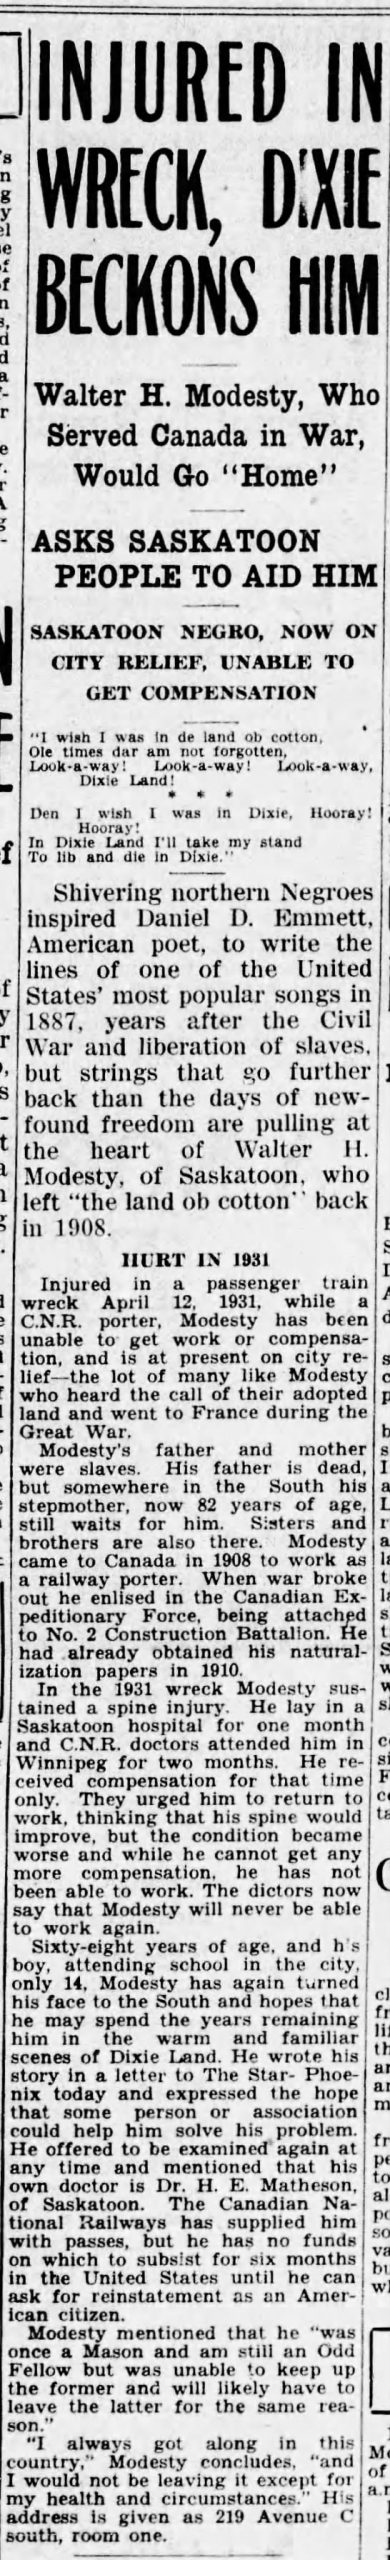 Black and white scan of a vintage newspaper clipping. The article is long and narrow, with the headline "INJURED IN WRECK, DIXIE BECKONS HIM" in large letters at the top. There are three subheadings and three sets of paragraphs below.